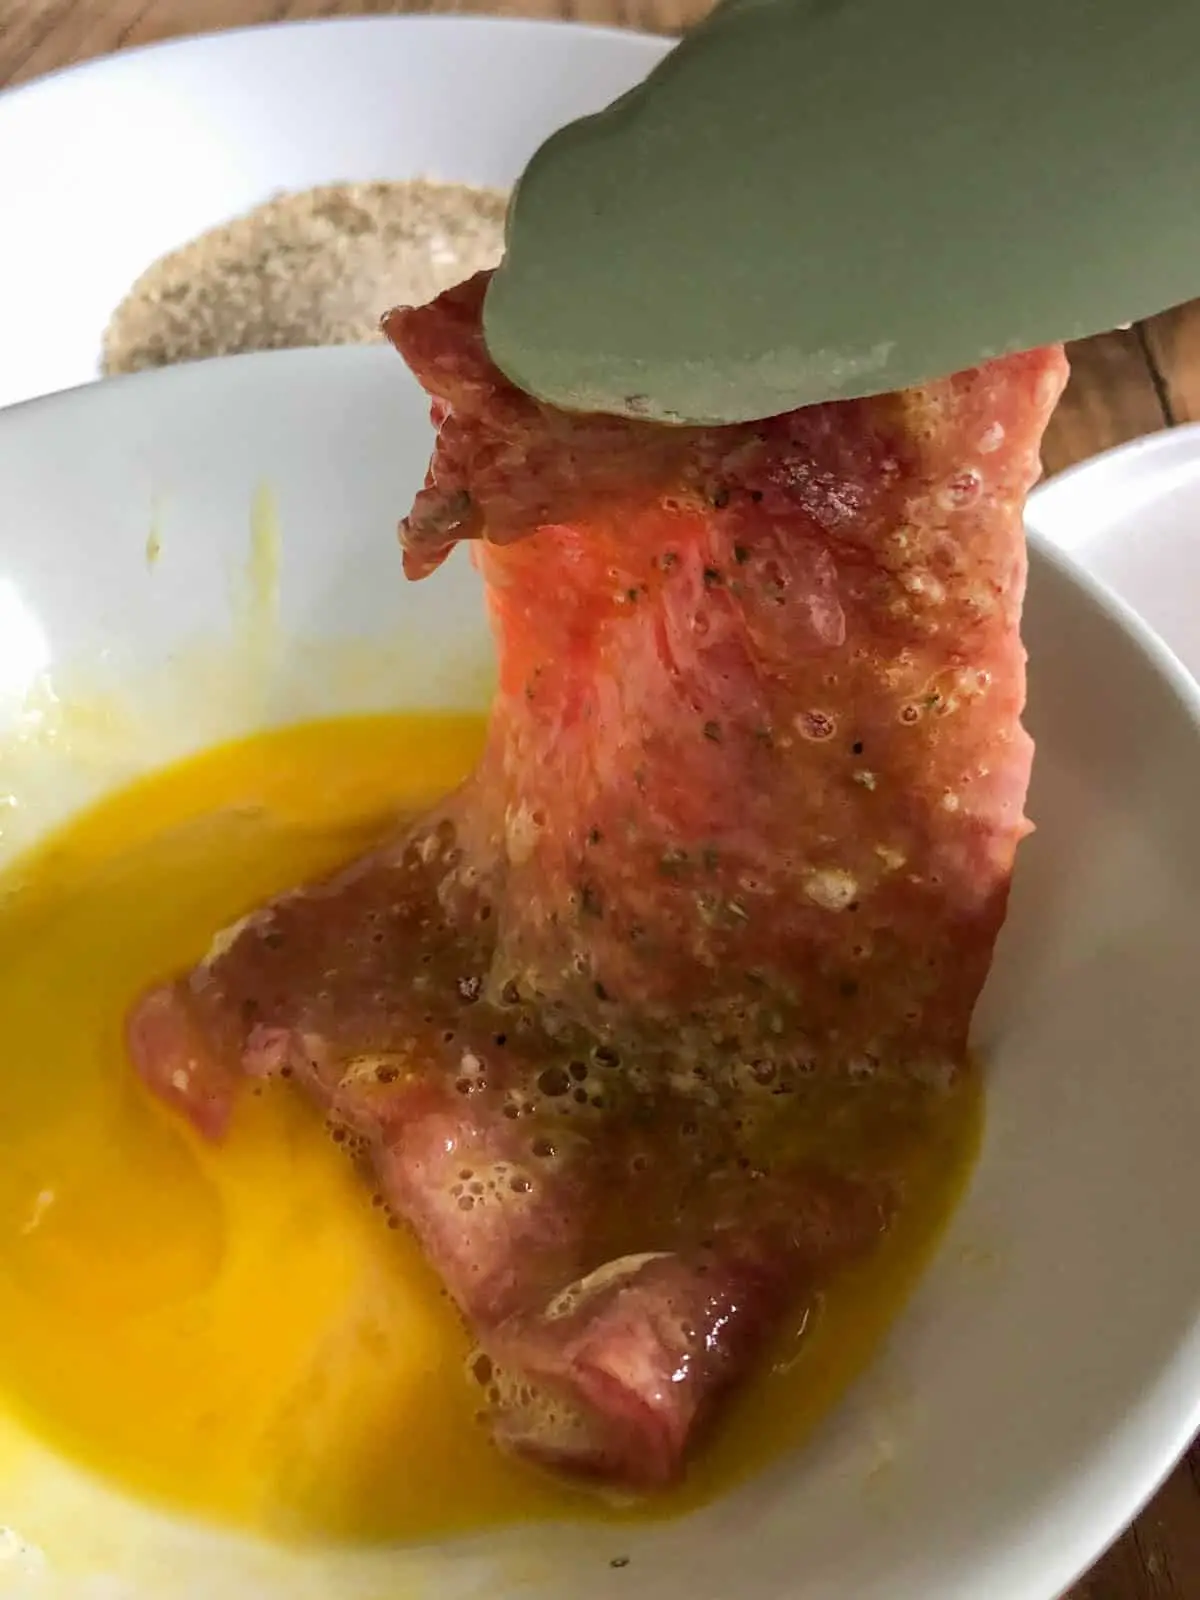 Veal cutlet that has been dipped in egg in a white bowl with a pair of blue tongs holding up the veal cutlet and a white bowl filled with bread crumbs in the background.